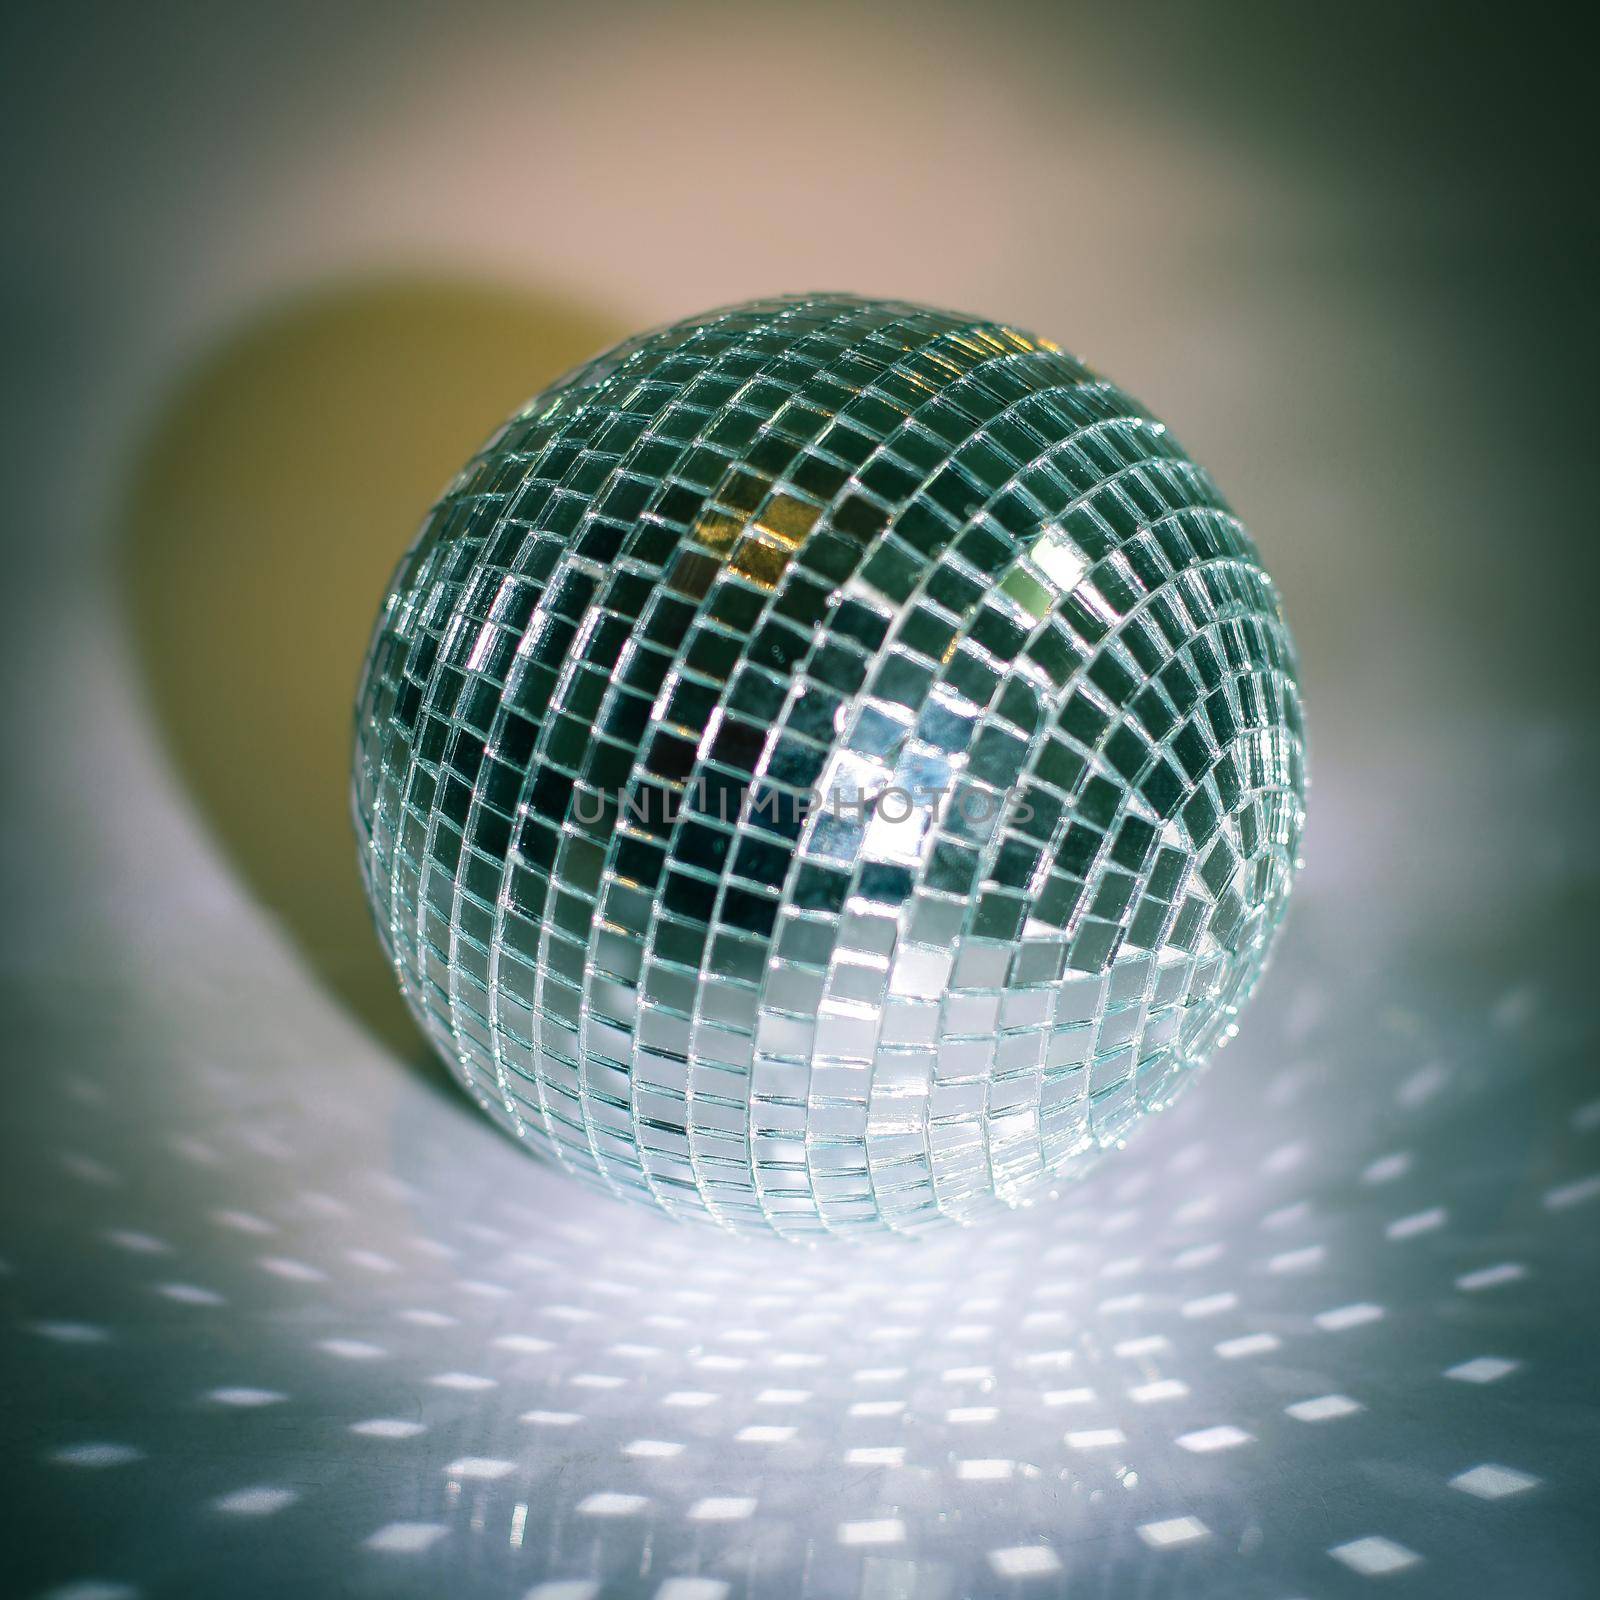 mirror ball.isolated on a dark background.photo with copy space